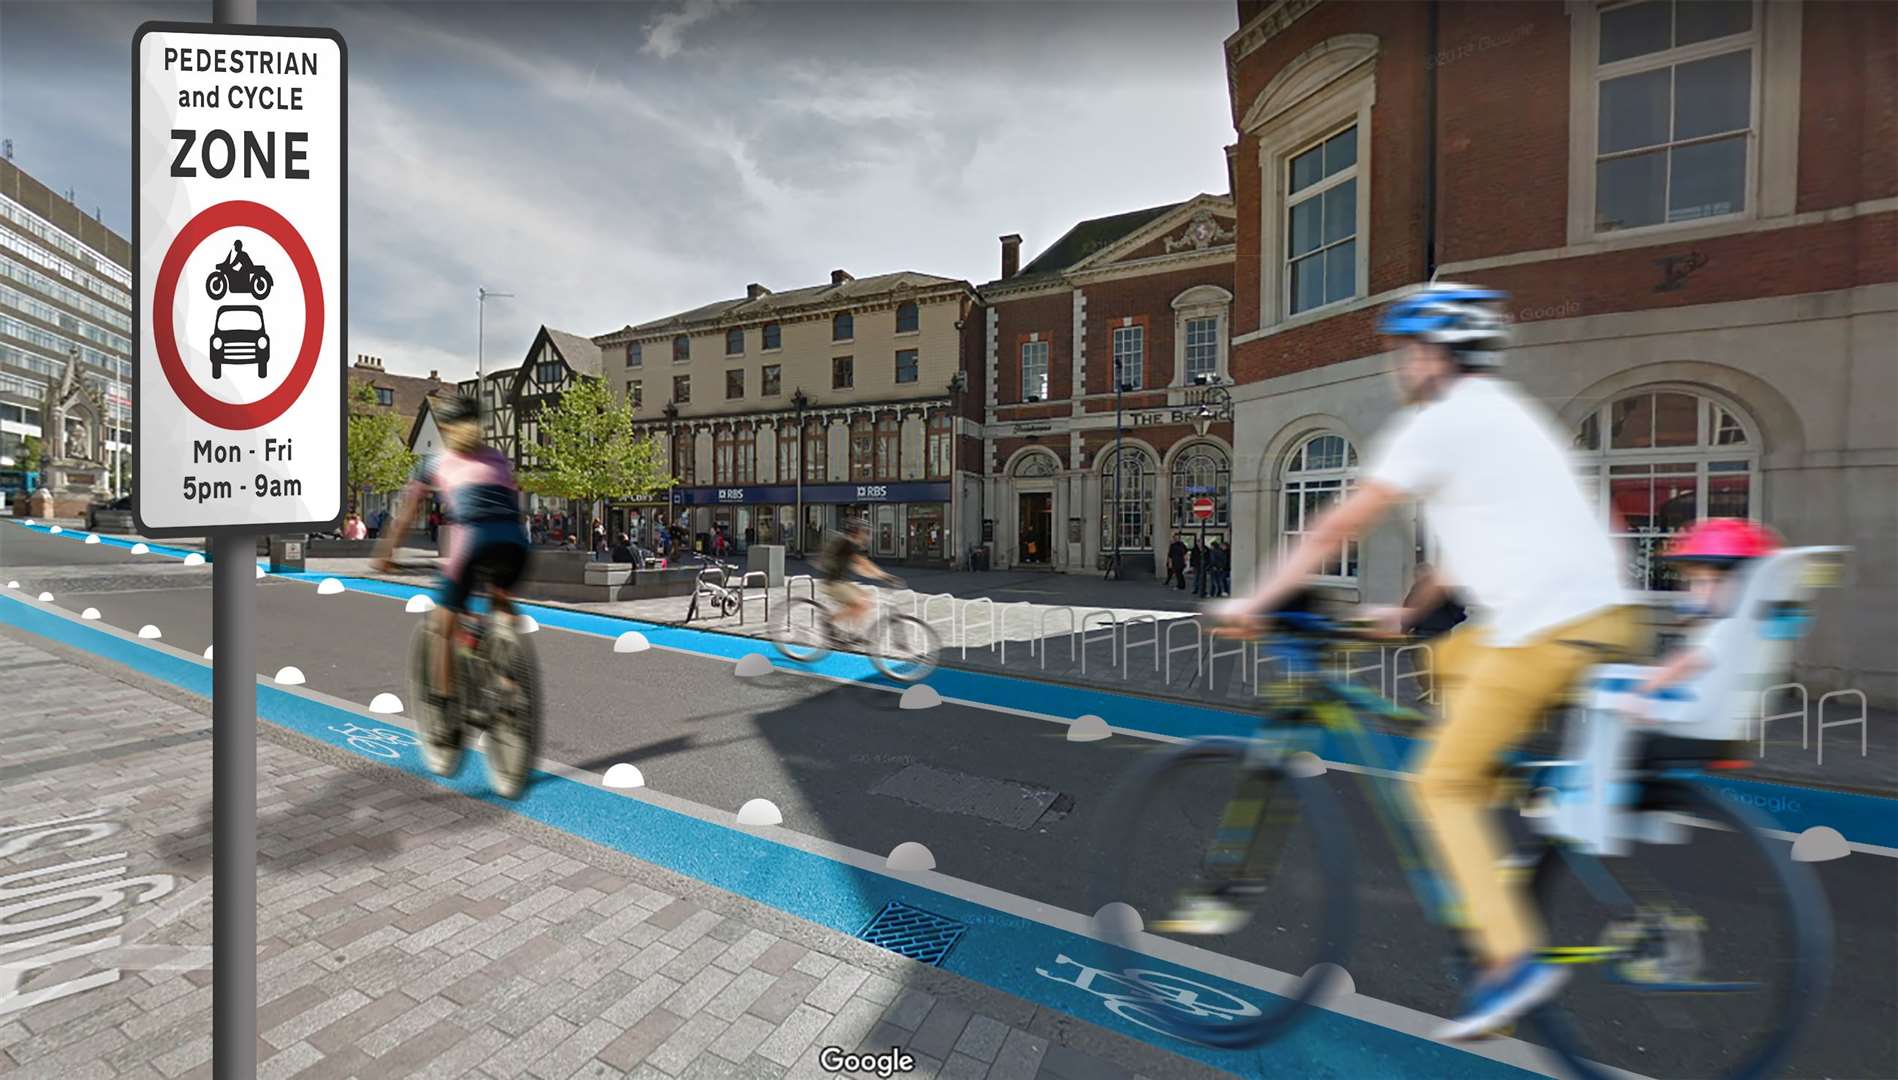 How Maidstone High Street could look in the future, with cycle lanes separated from road with bollards and traffic free zone for some hours of the day. (These changes are just an example and are not endorsed by the council).